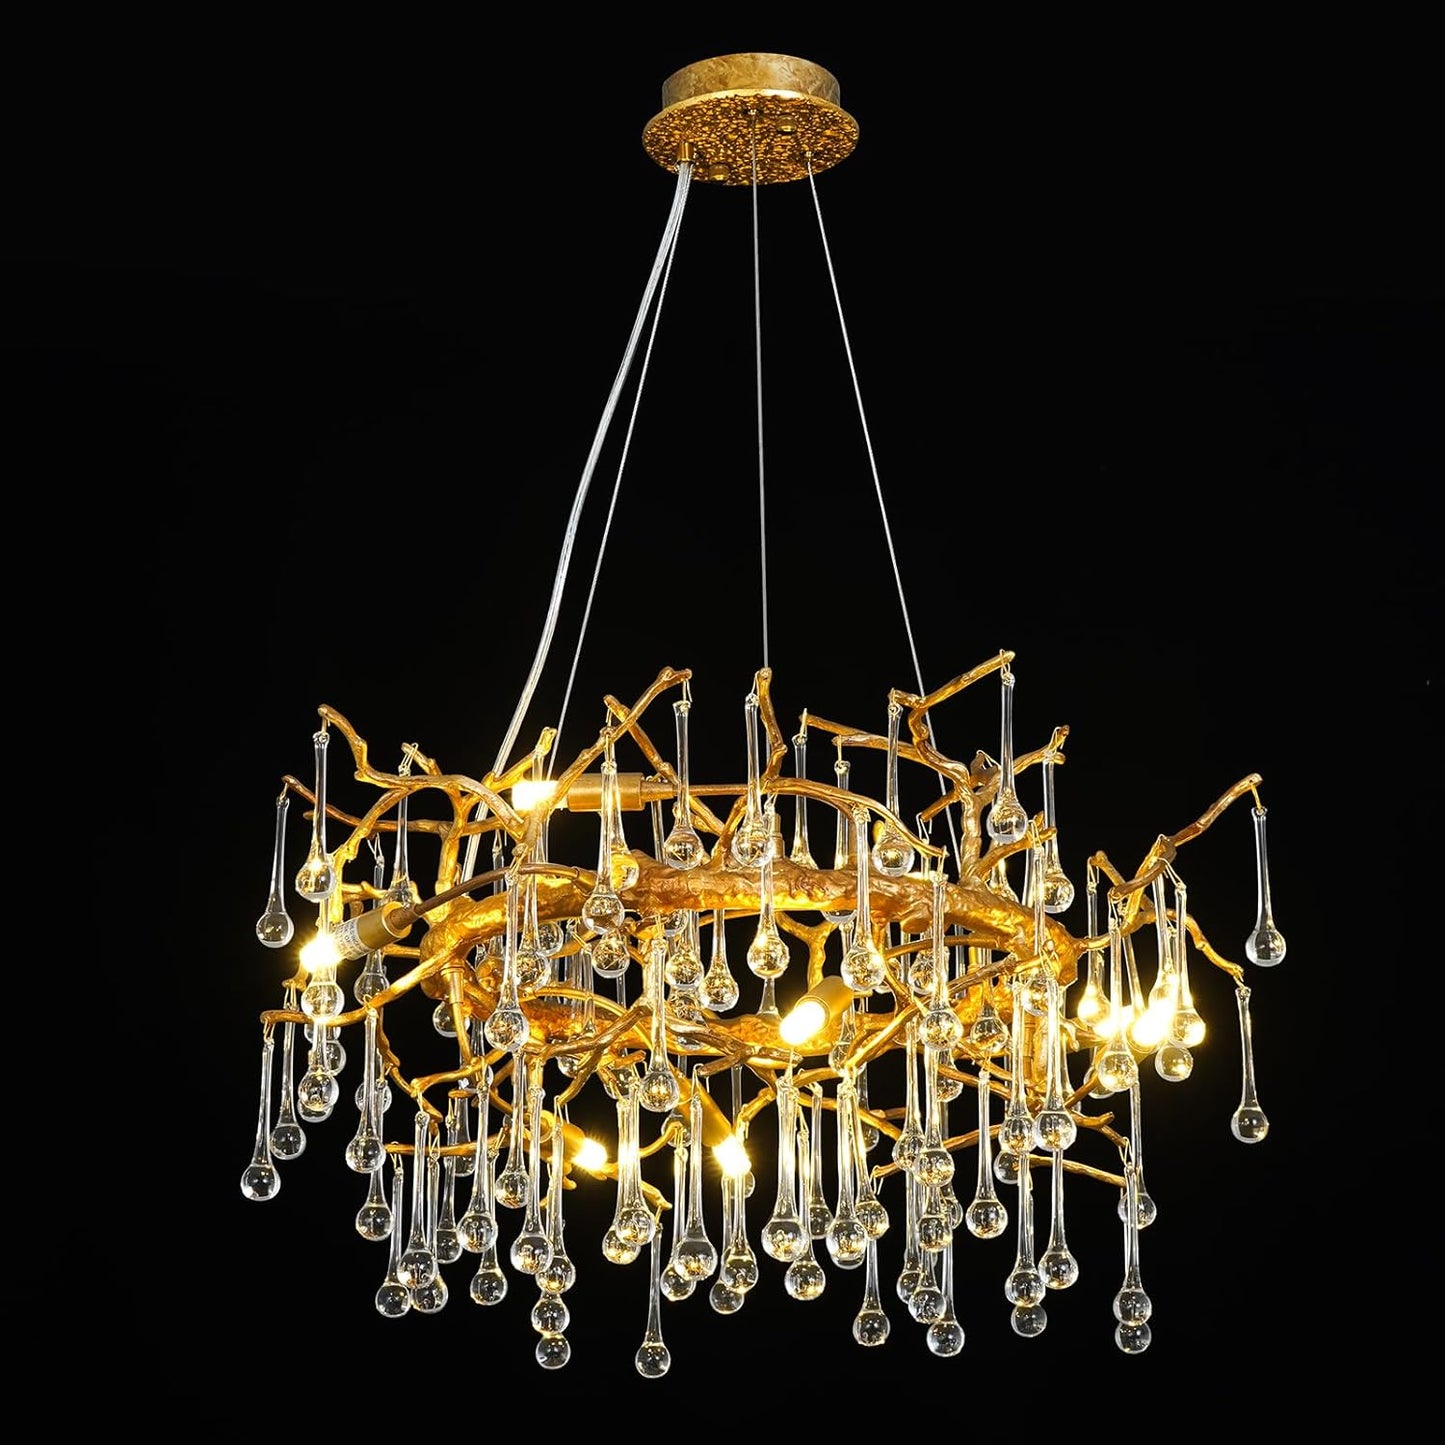 CHGUOSZ Crystal Chandelier Antique Bronze Gold Crystal Chandelier for Dining Room,Ceiling Pendant Light Fixture for Living Bedroom Hall Farmhouse Foyer 24 inch,Chain Adjustable (24 inch)